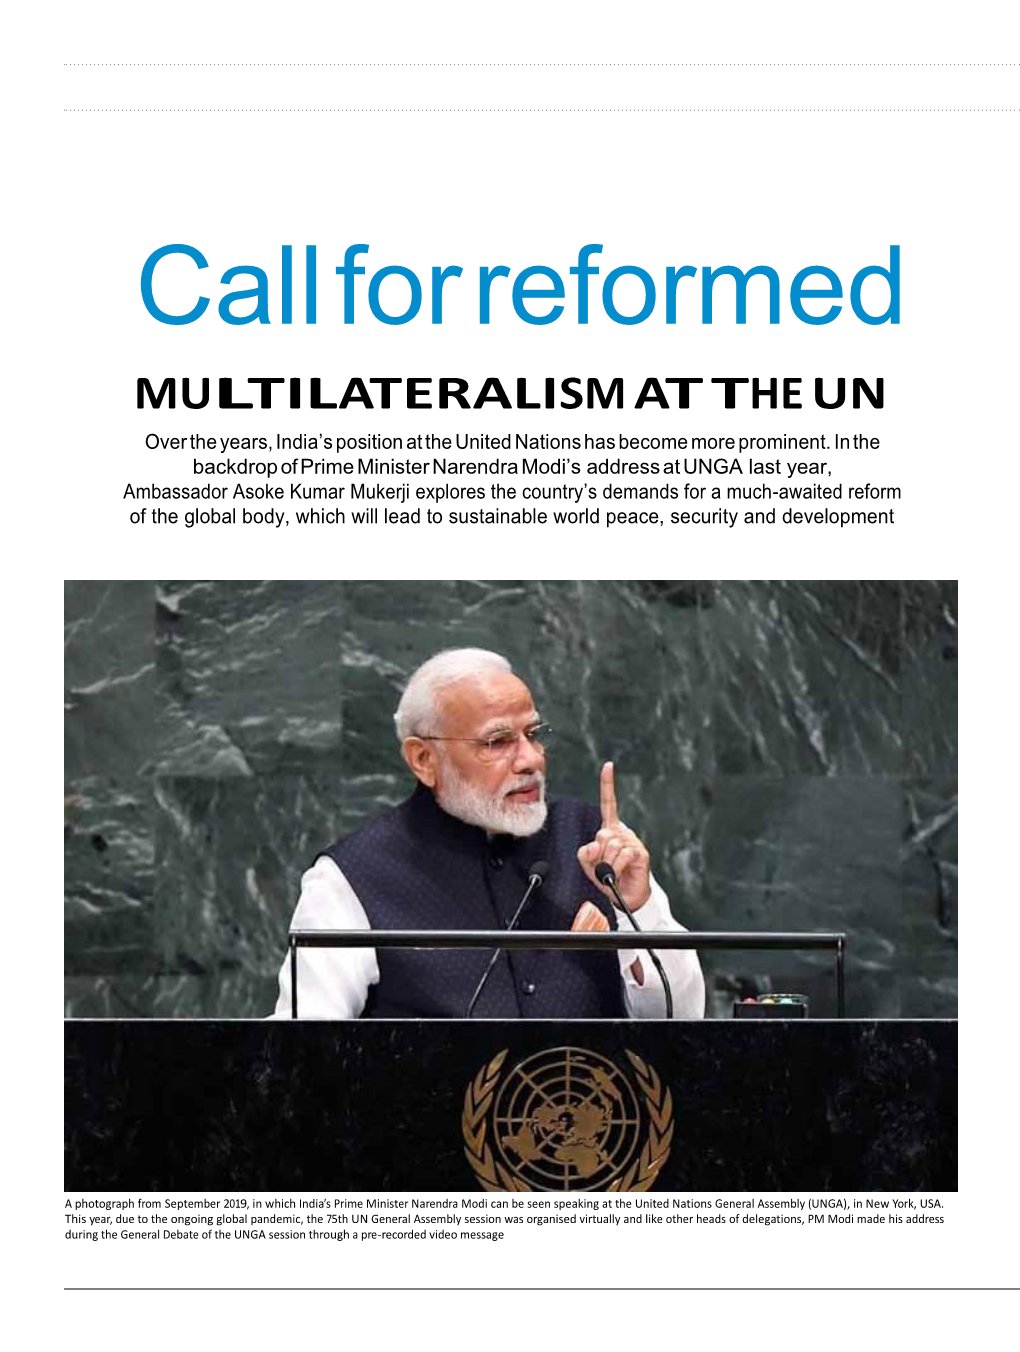 Call for Reformed MULTILATERALISM at the UN Over the Years, India’S Position at the United Nations Has Become More Prominent